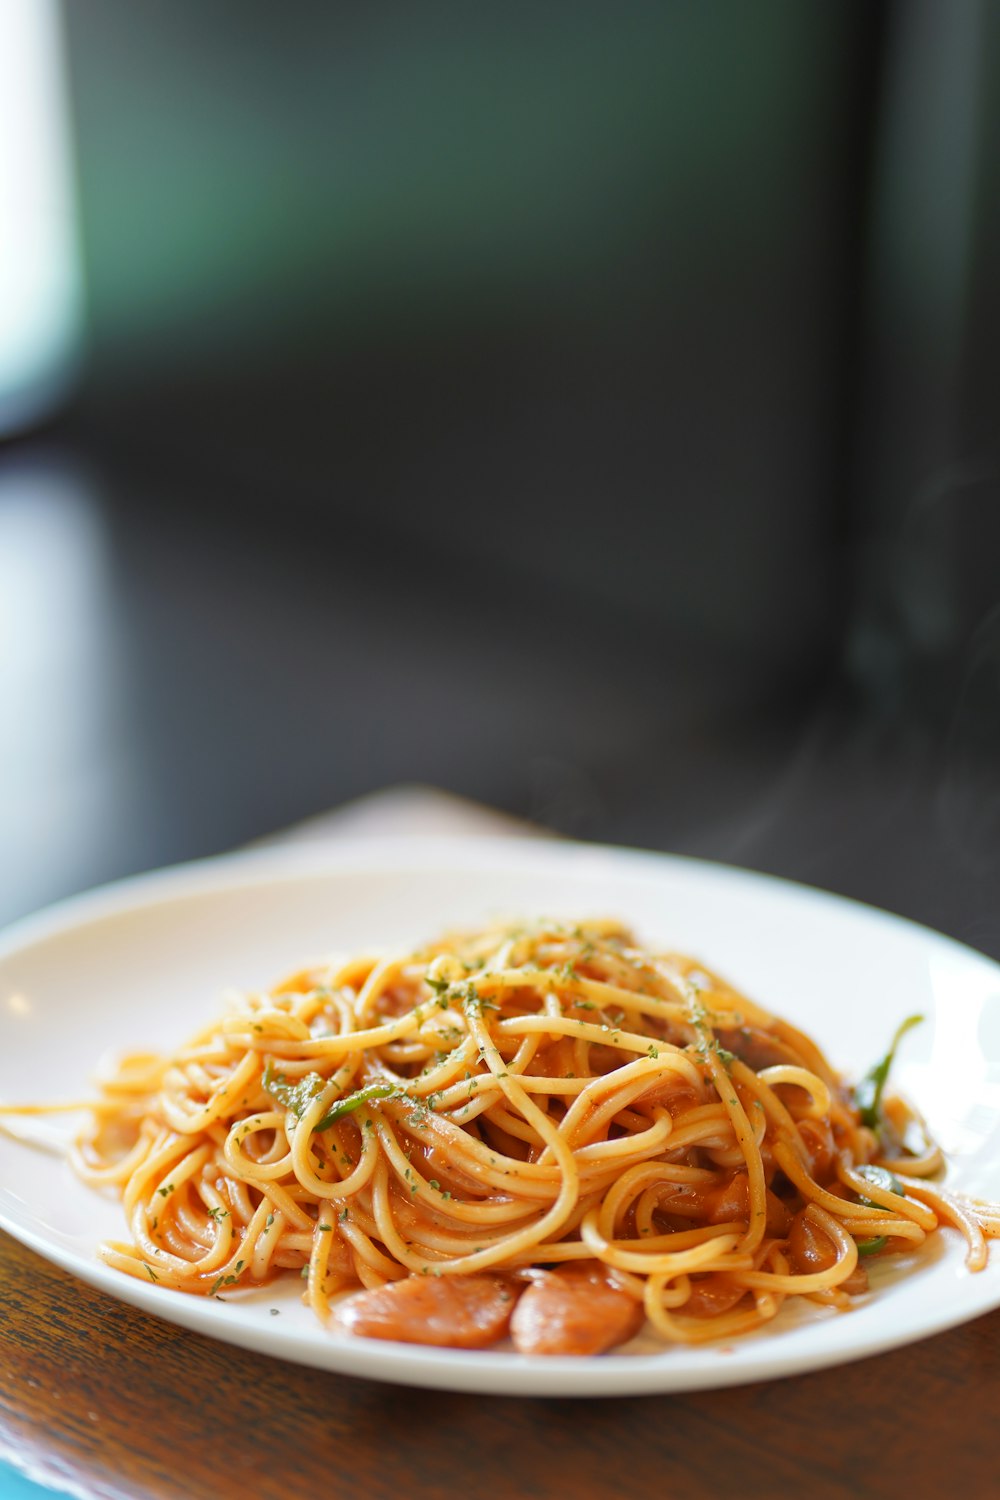 a plate of spaghetti on a wooden table